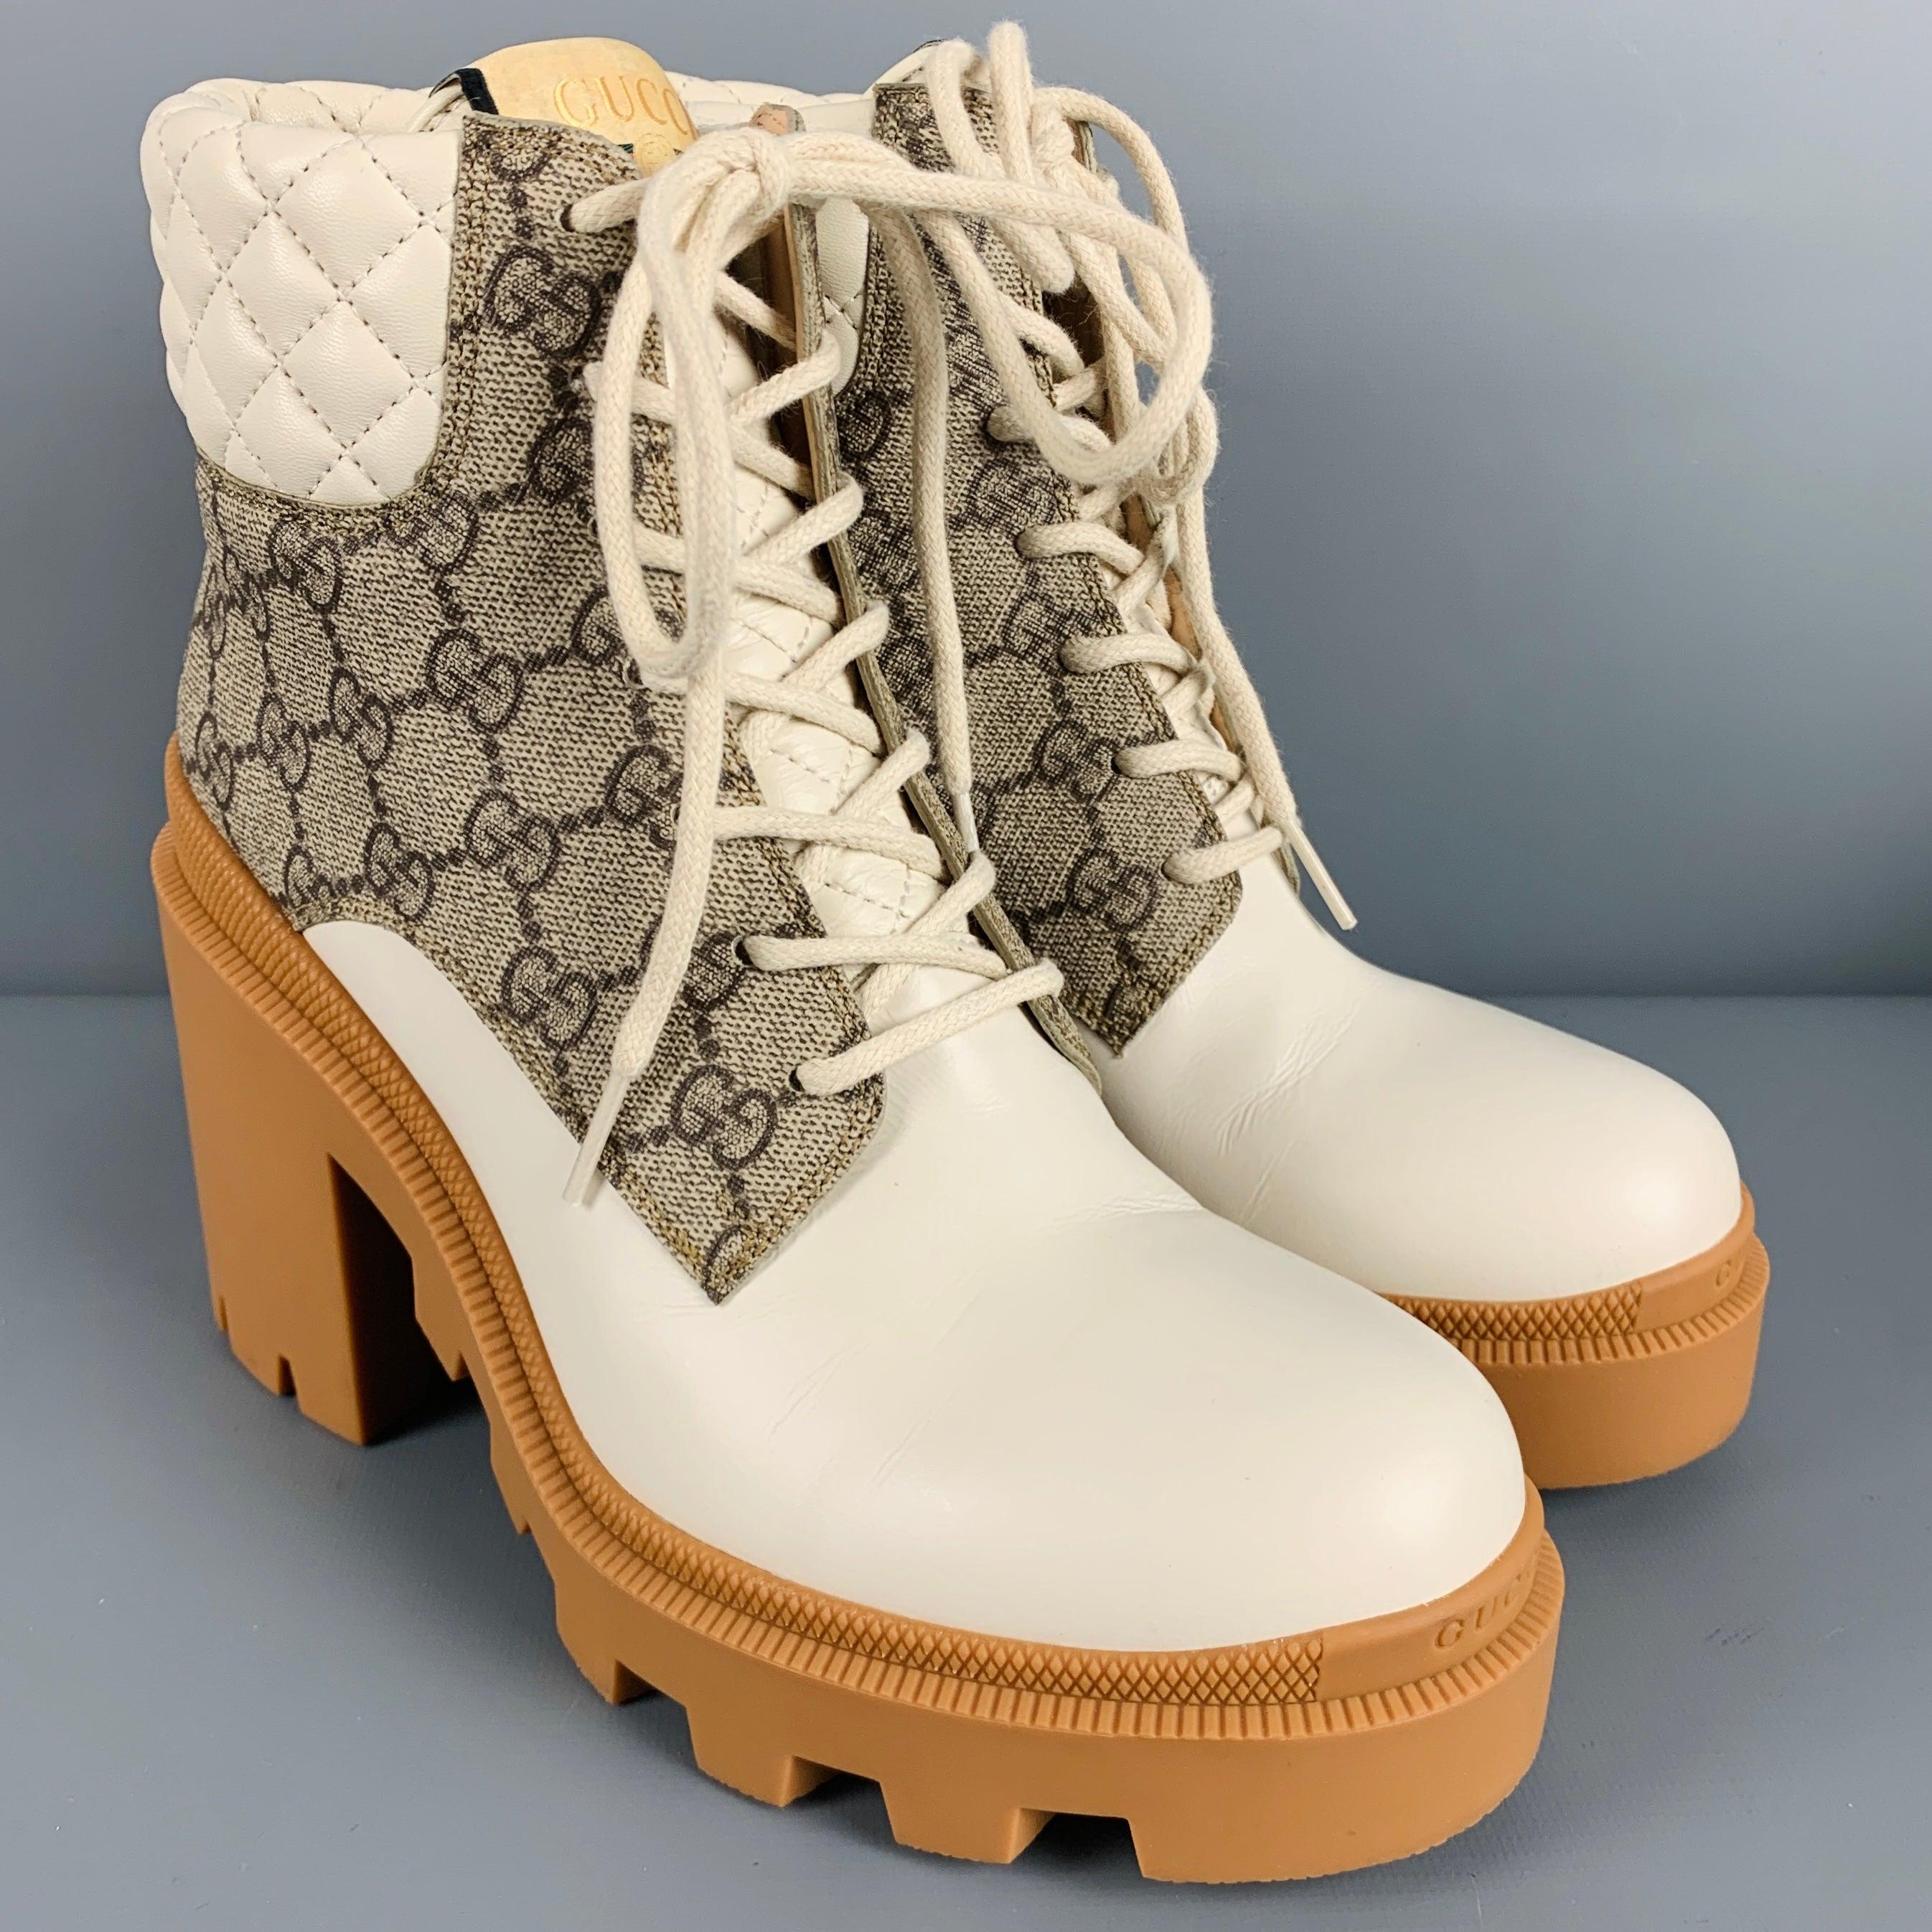 GUCCI boots
in a cream leather featuring brown GG monogram, platform style with chunky heel, and lace-up closure. Comes with box, dust bag, and extra laces. Made in Italy.Very Good Pre-Owned Condition with Box. Minor scuff marks. 

Marked:   659691